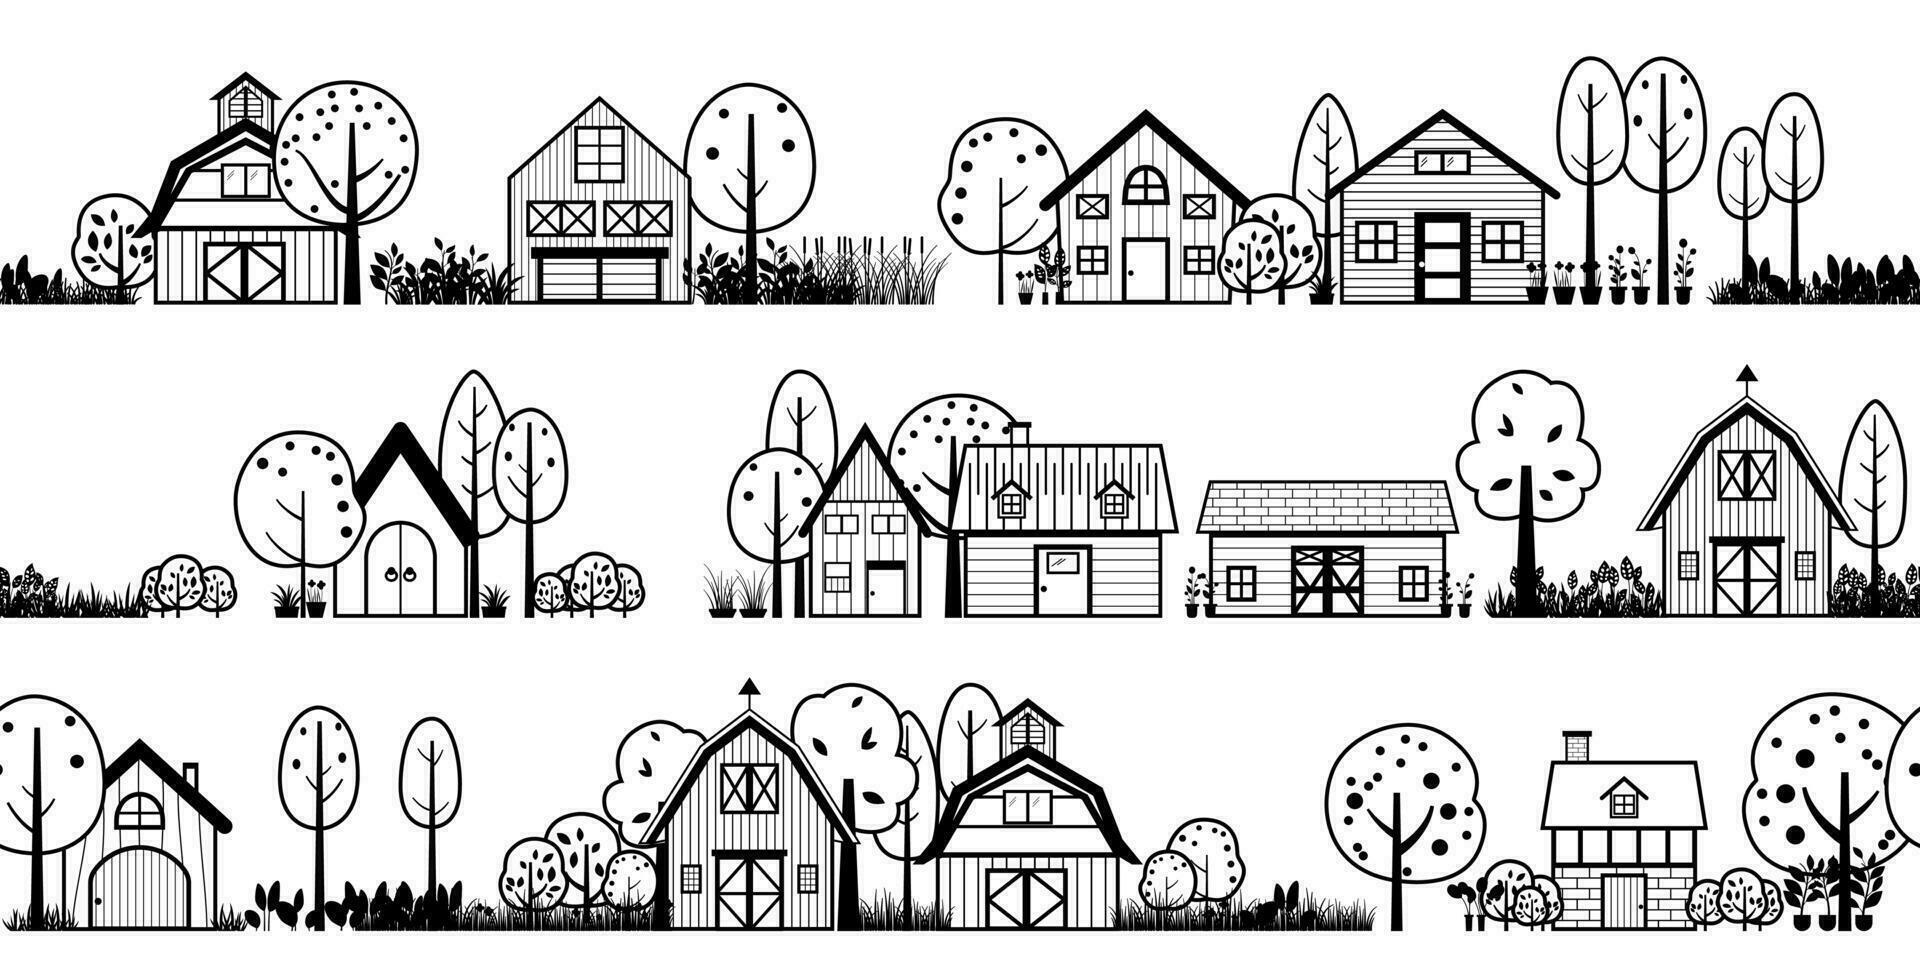 small town silhouette cutout skyline with houses, barn and trees black. buildings with roofs, chimneys and windows vector